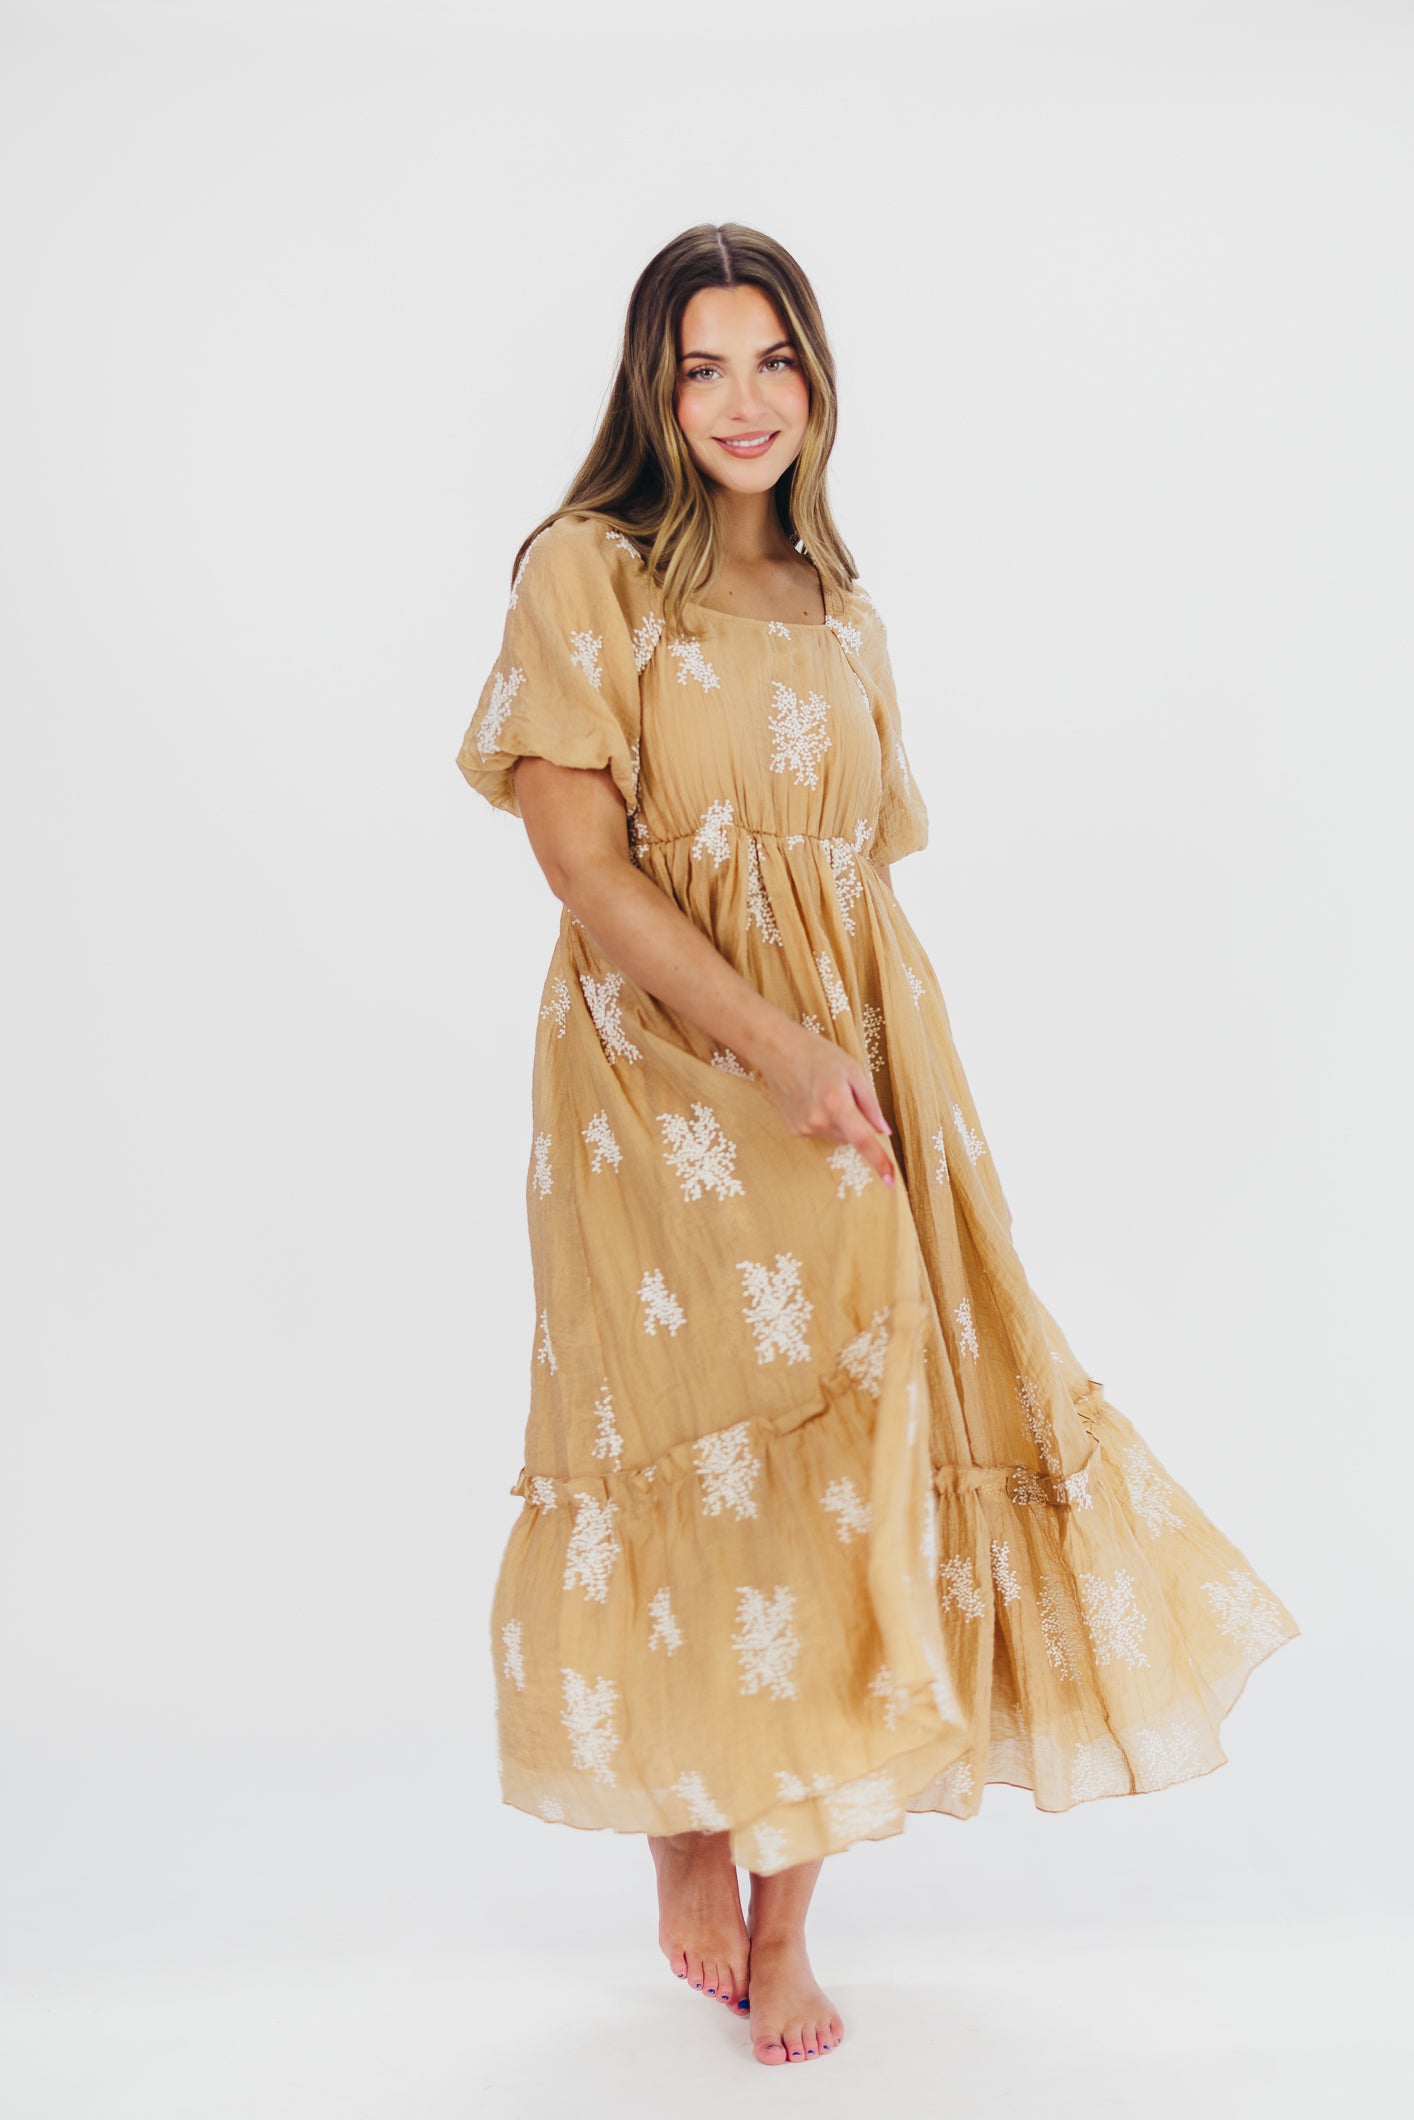 Hallie Embroidered Maxi Dress in Camel - Bump Friendly & Inclusive Sizing (S-3XL)